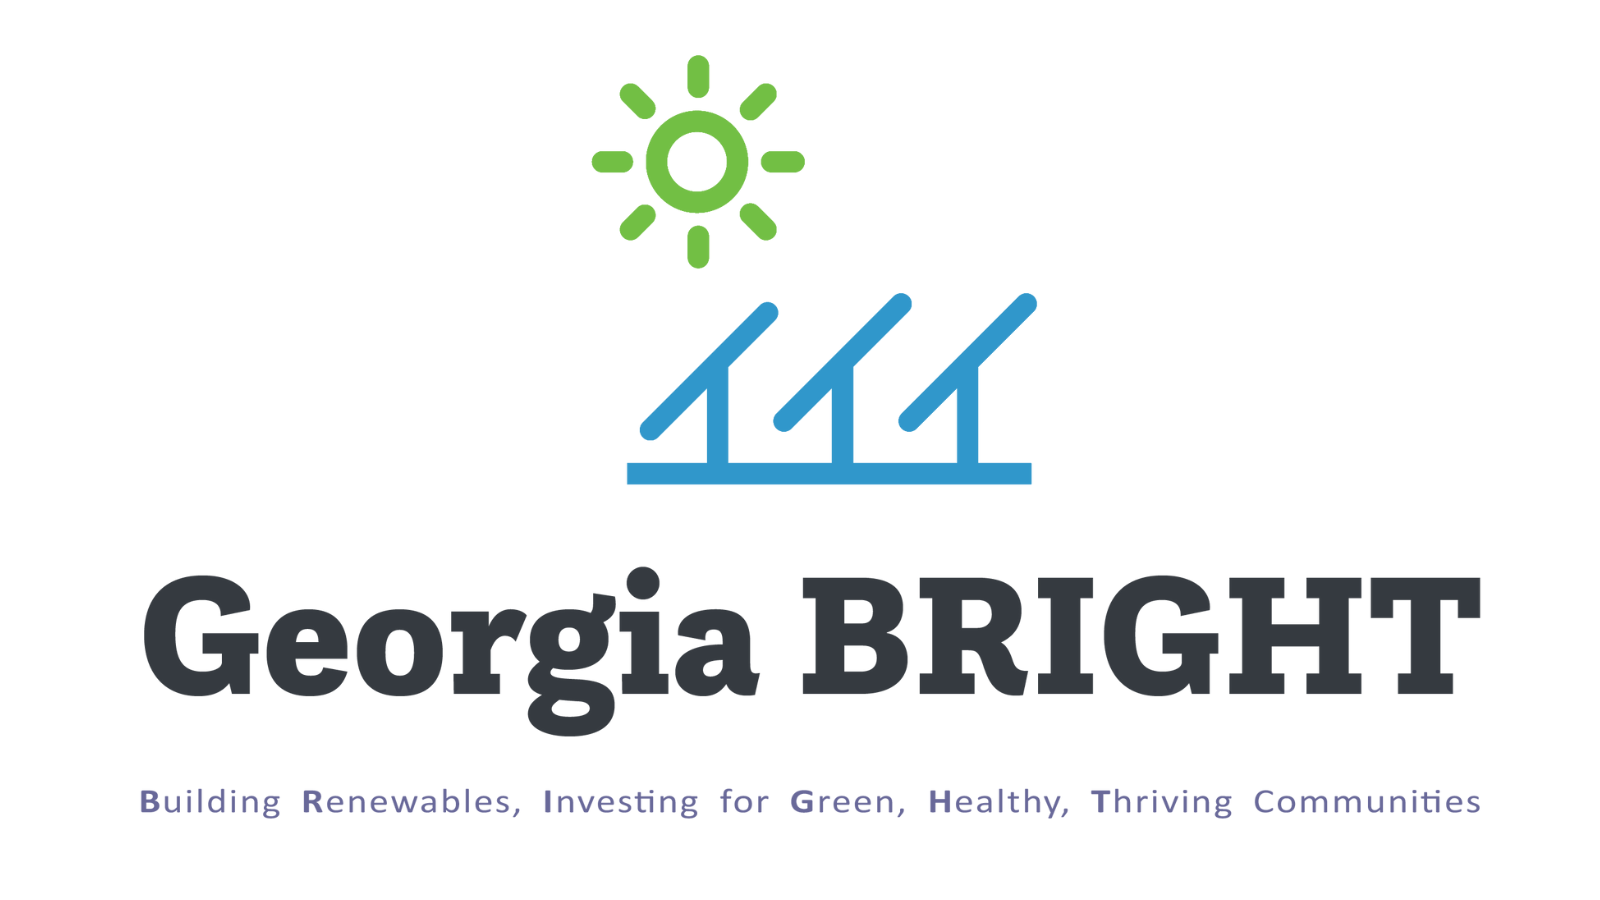 Capital Good Fund Launches First of Its Kind Solar Leasing Program for LMI Families in Georgia